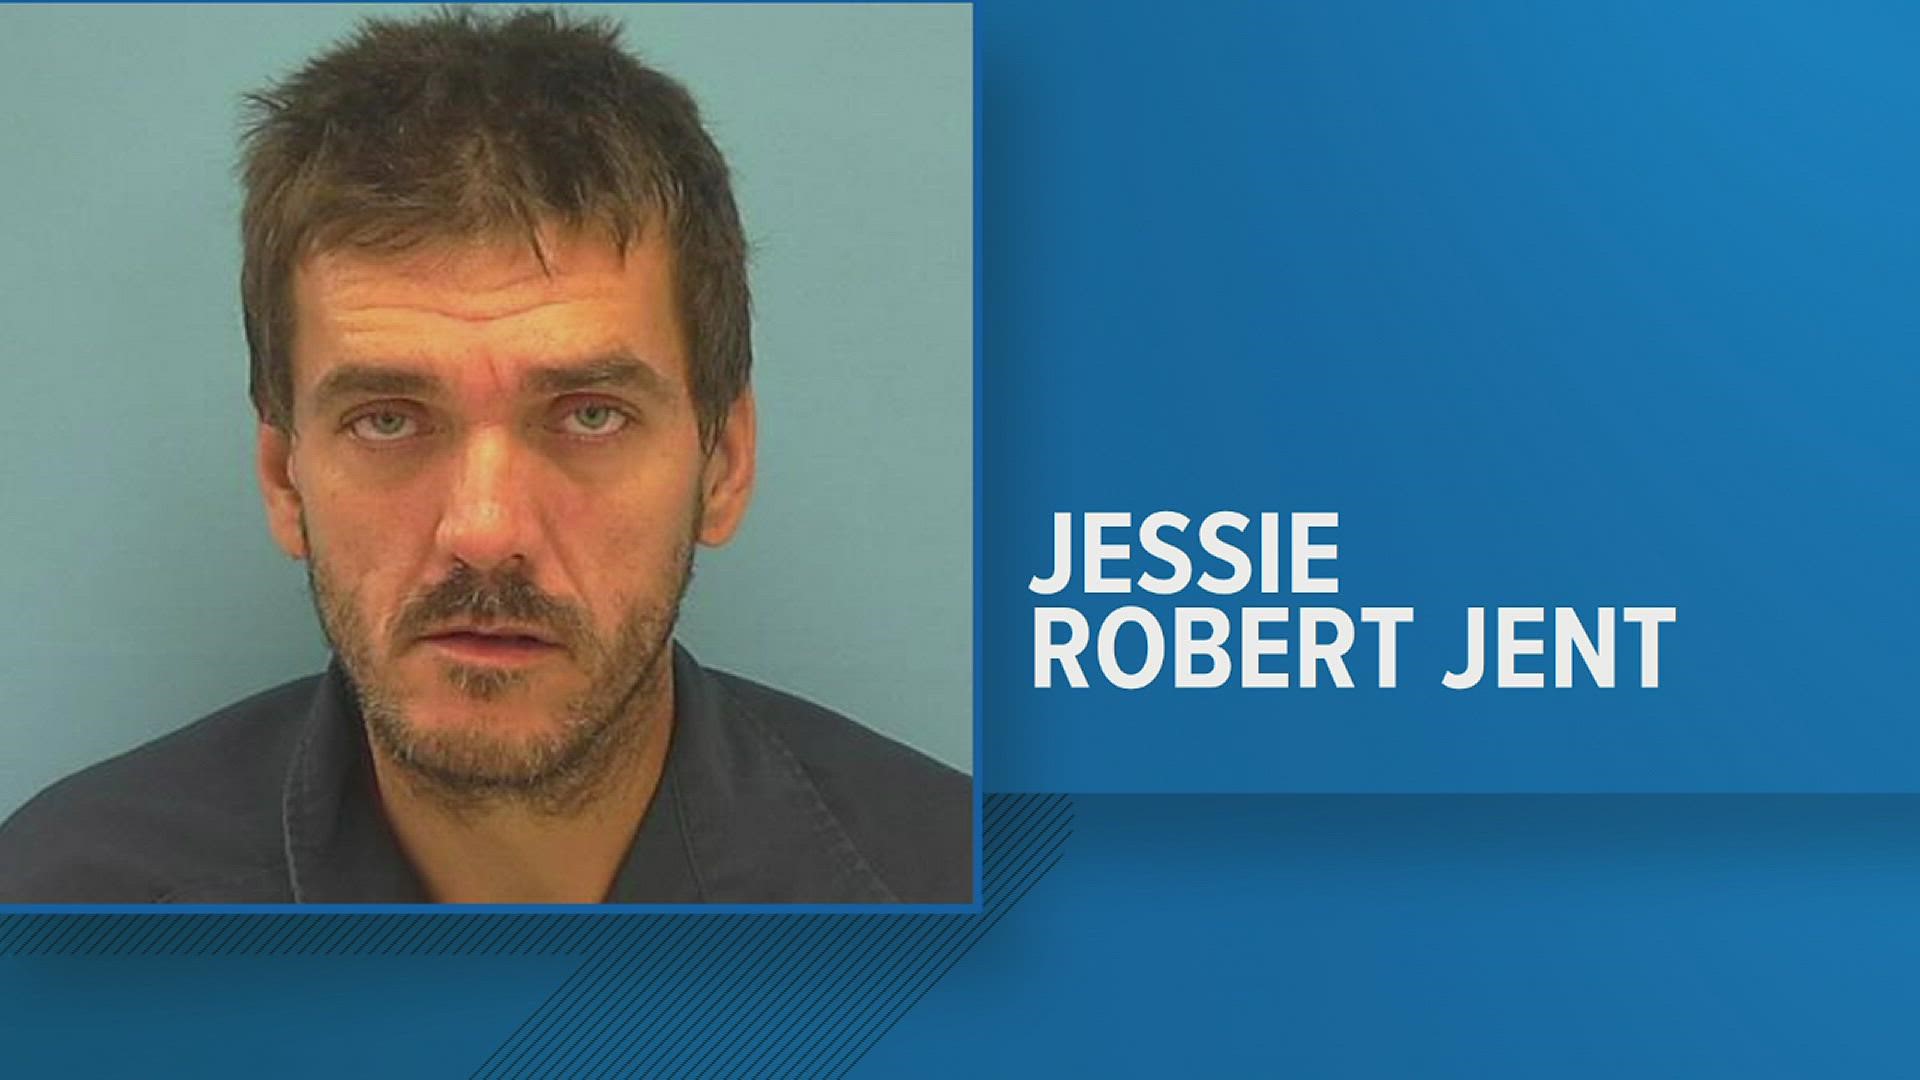 Jessie Robert Jent was found guilty of sexual assault of a child after an incident involving a 13-year-old girl.